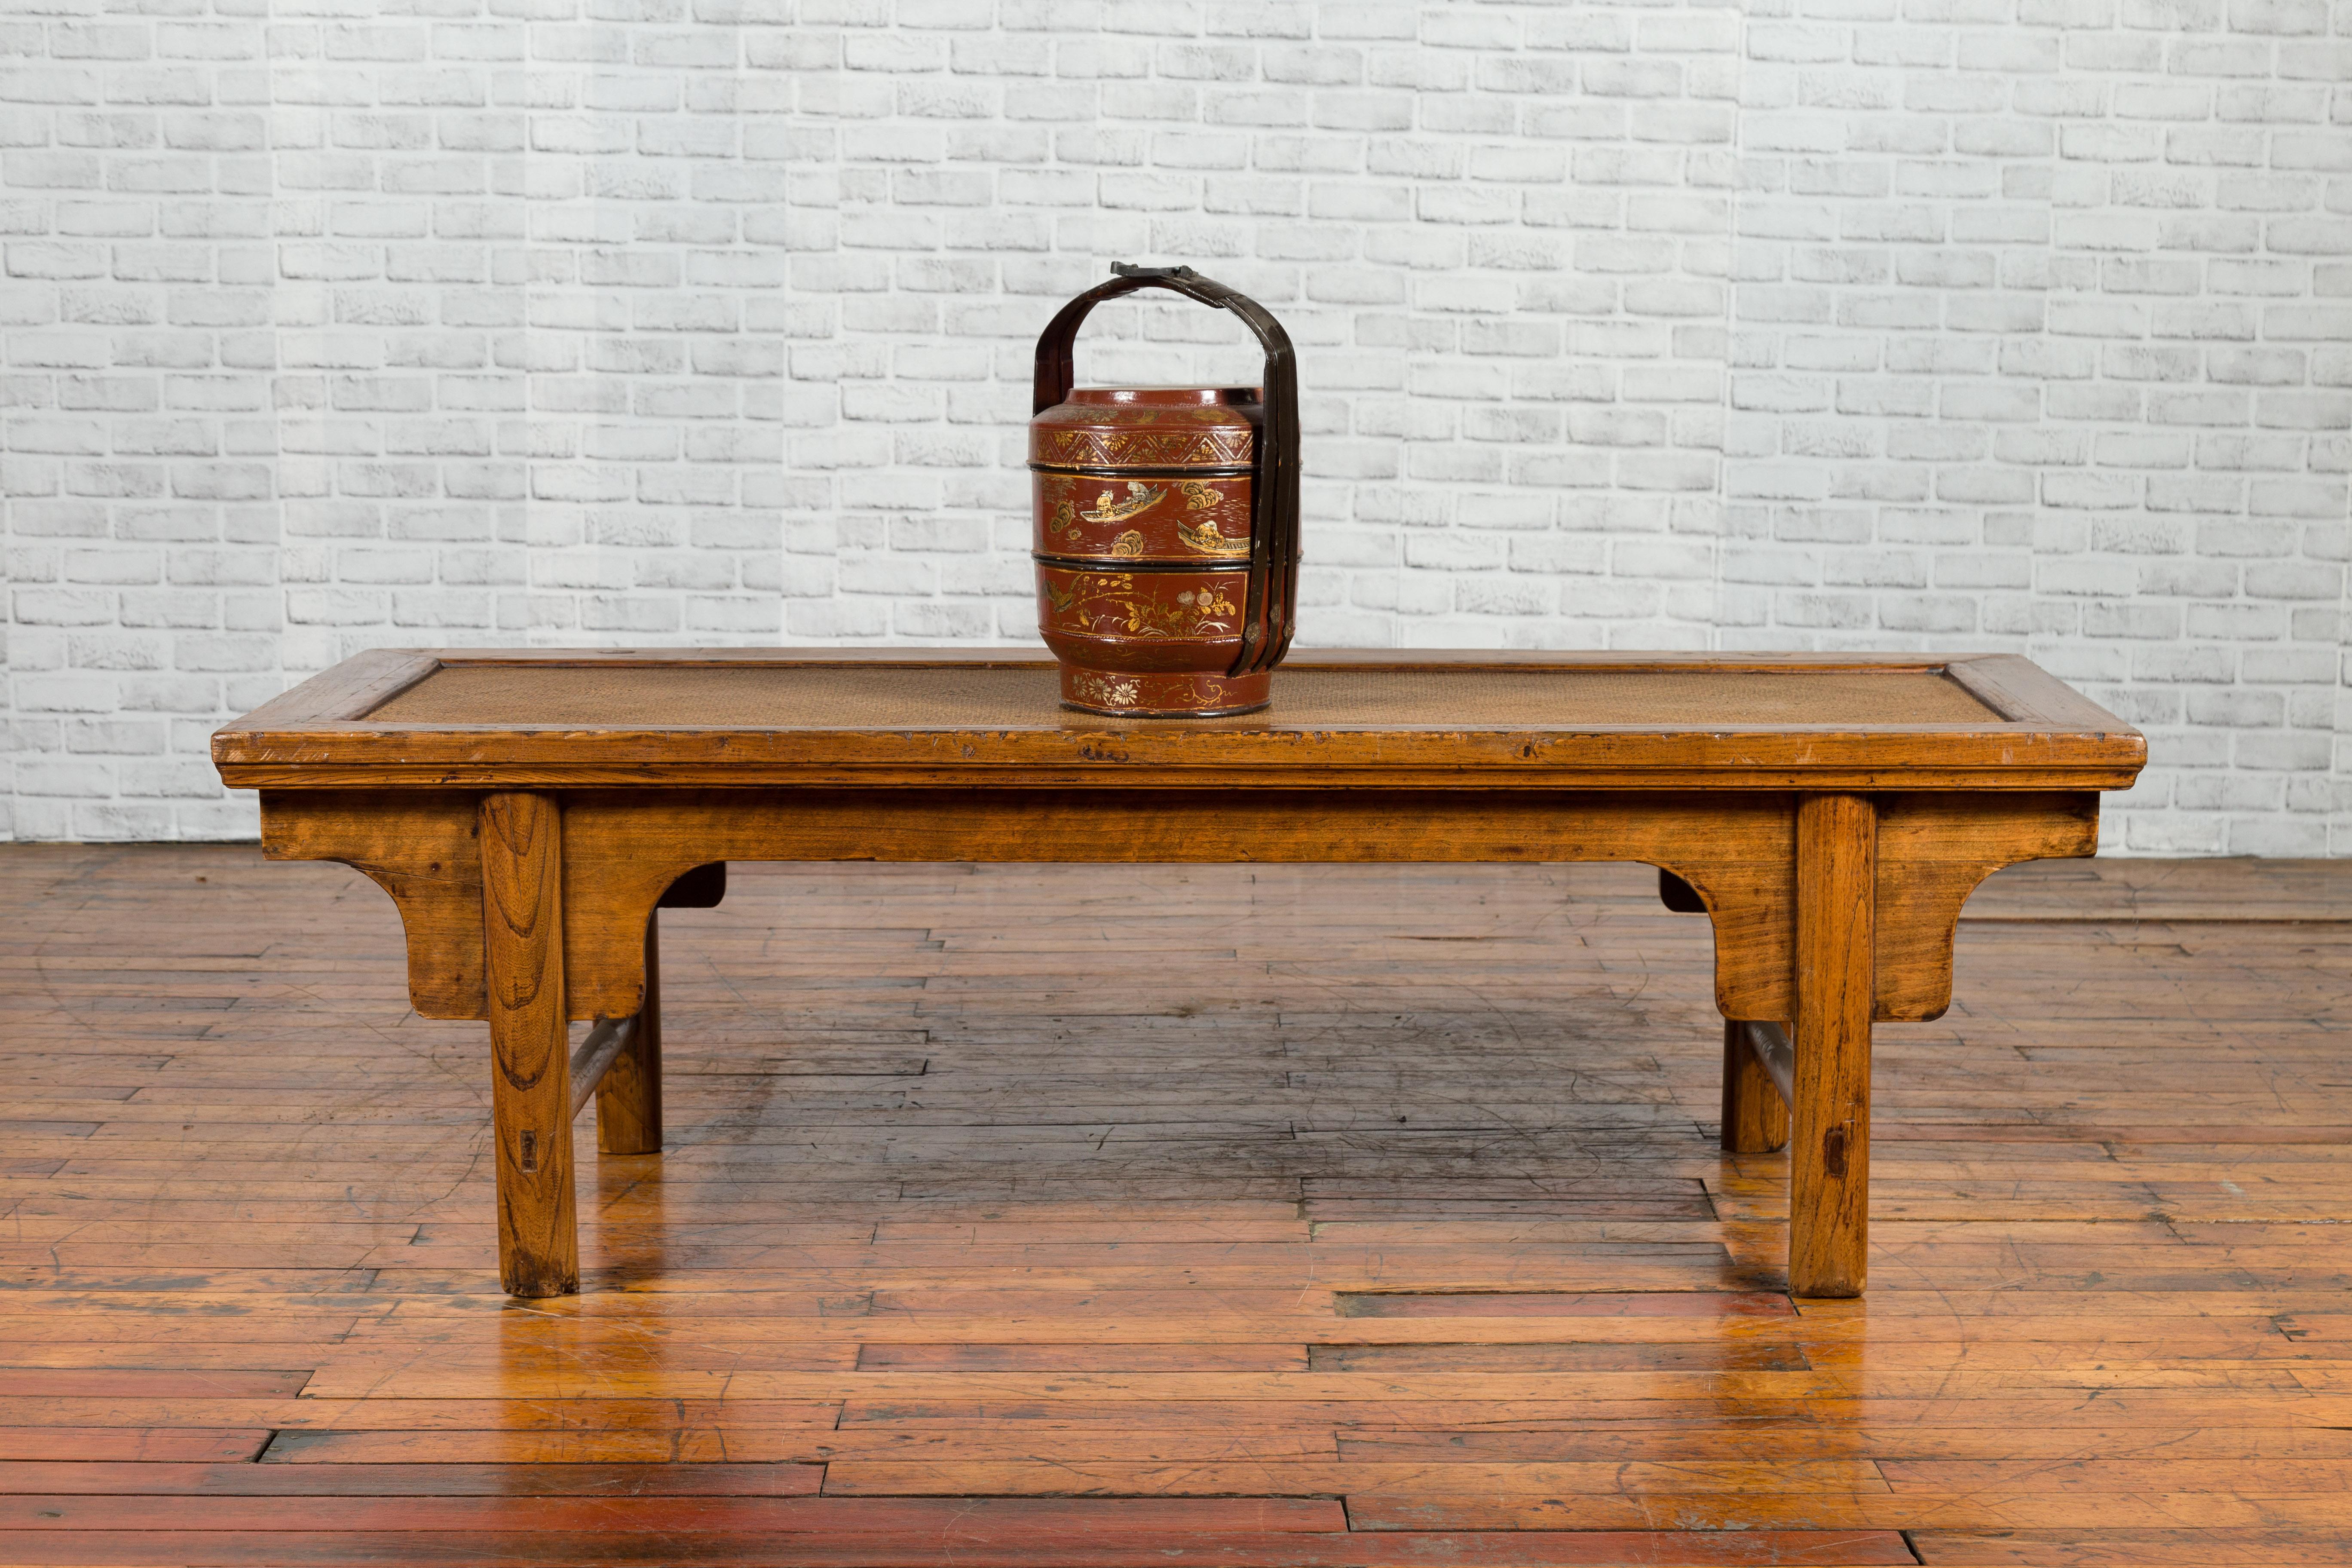 Chinese Qing Dynasty Period 19th Century Coffee Table with Woven Rattan Top 1